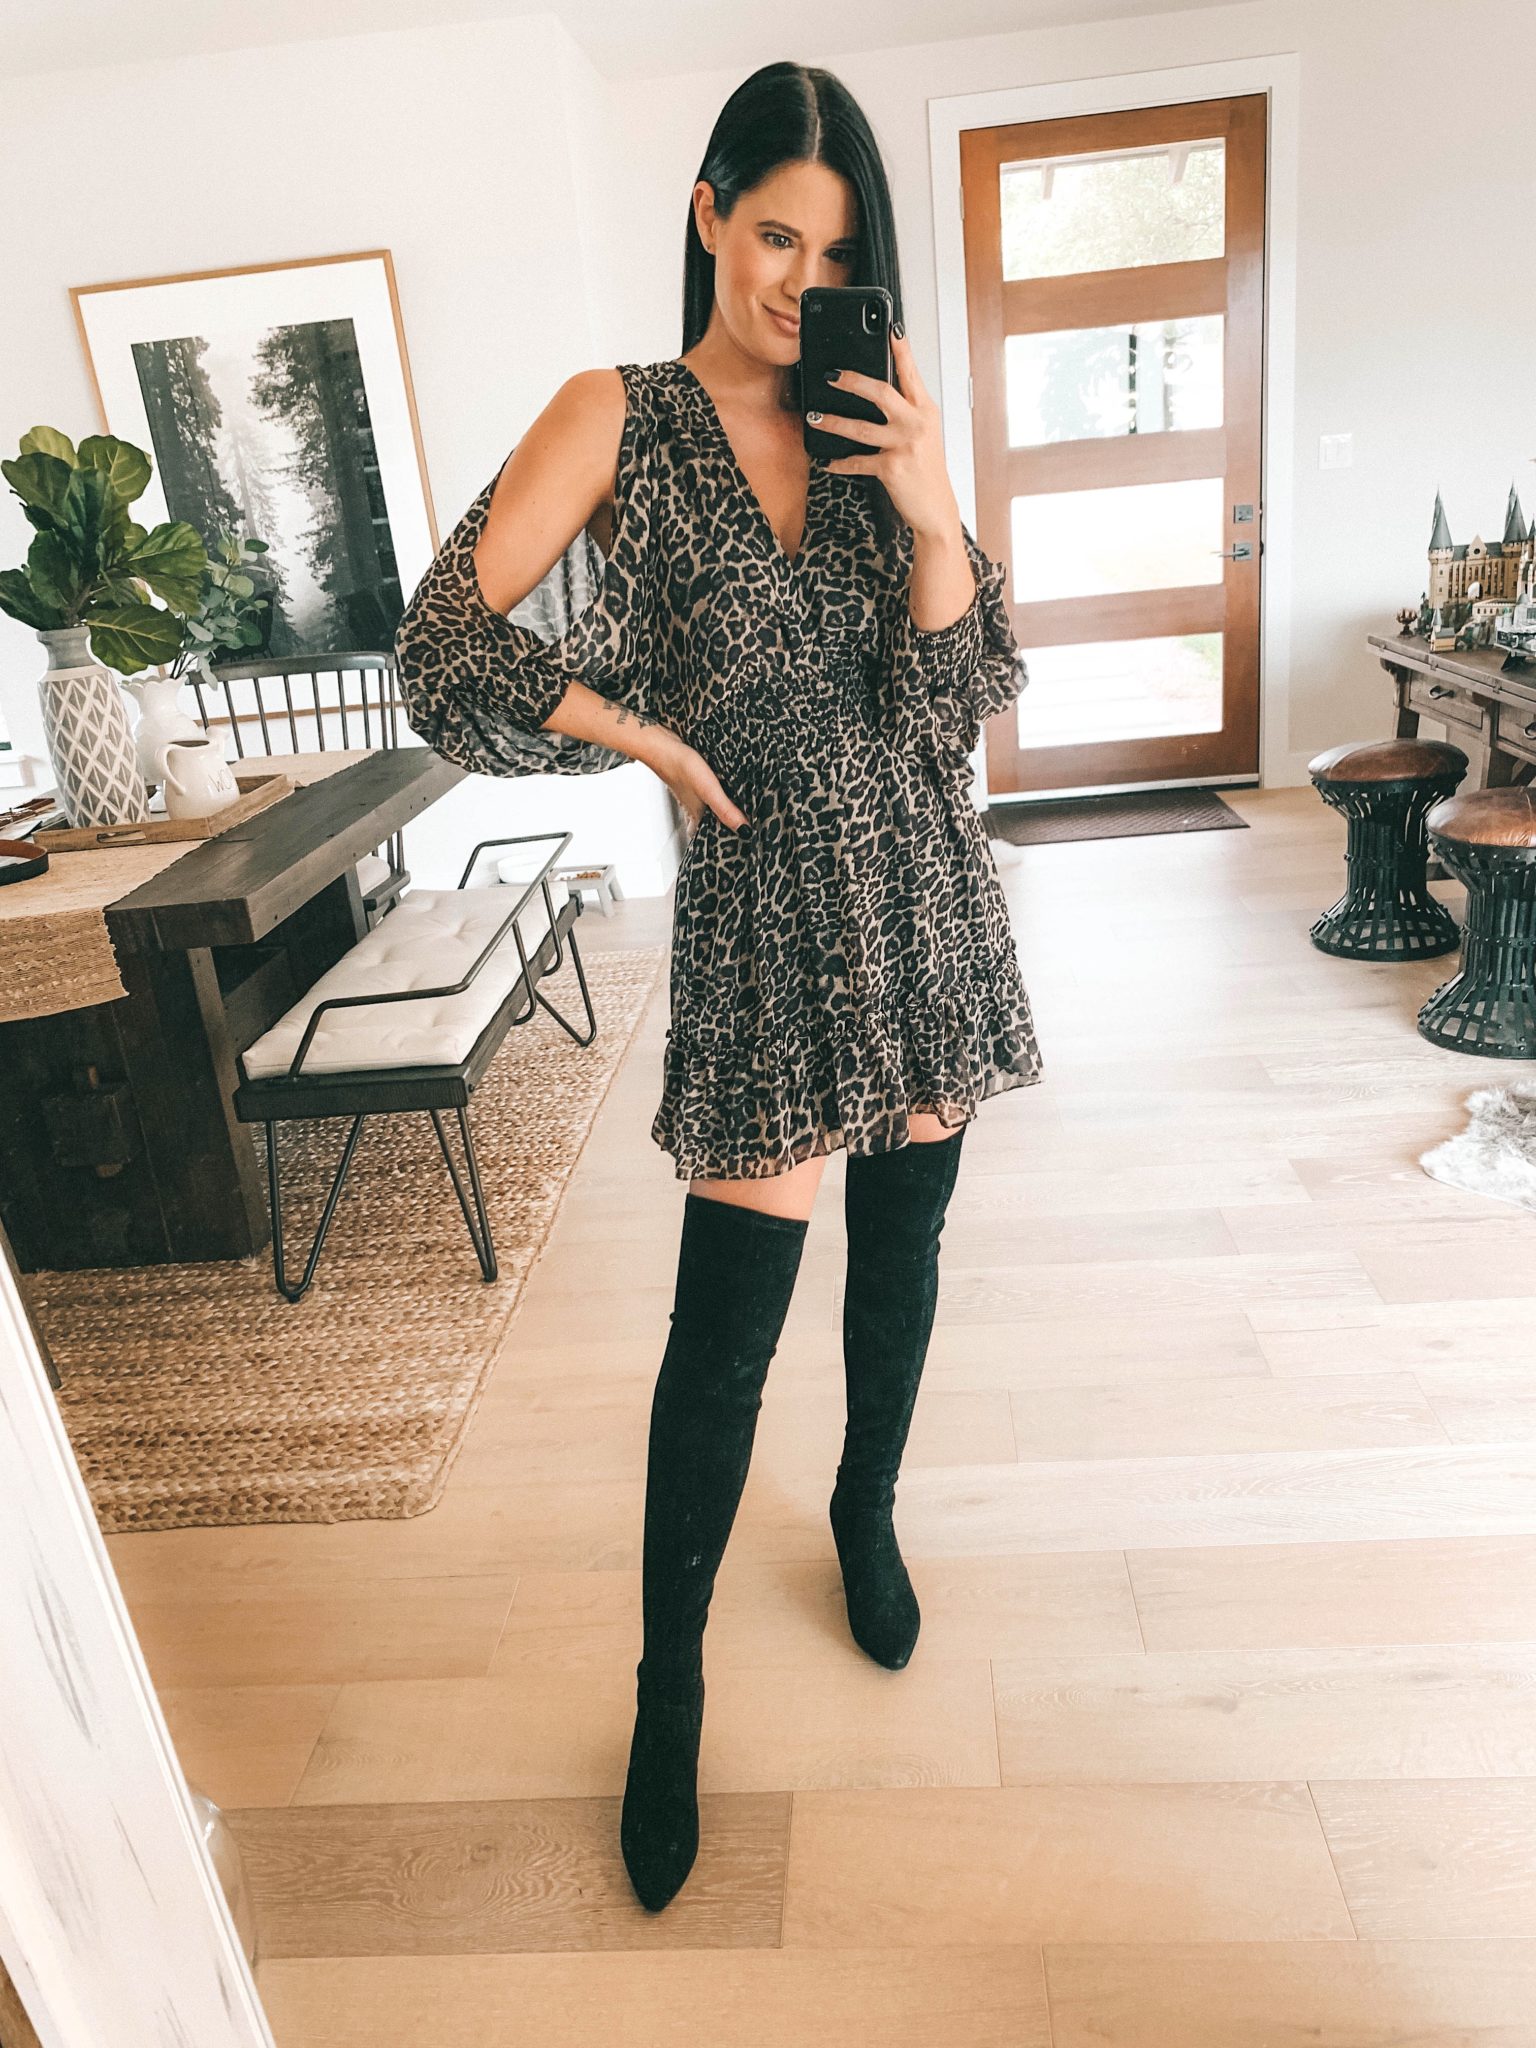 Lovestitch Fall Outfit Try-On Session by popular Austin fashion blog, Dressed to Kill: image of a woman wearing a Lovestitch leopard mini dress.